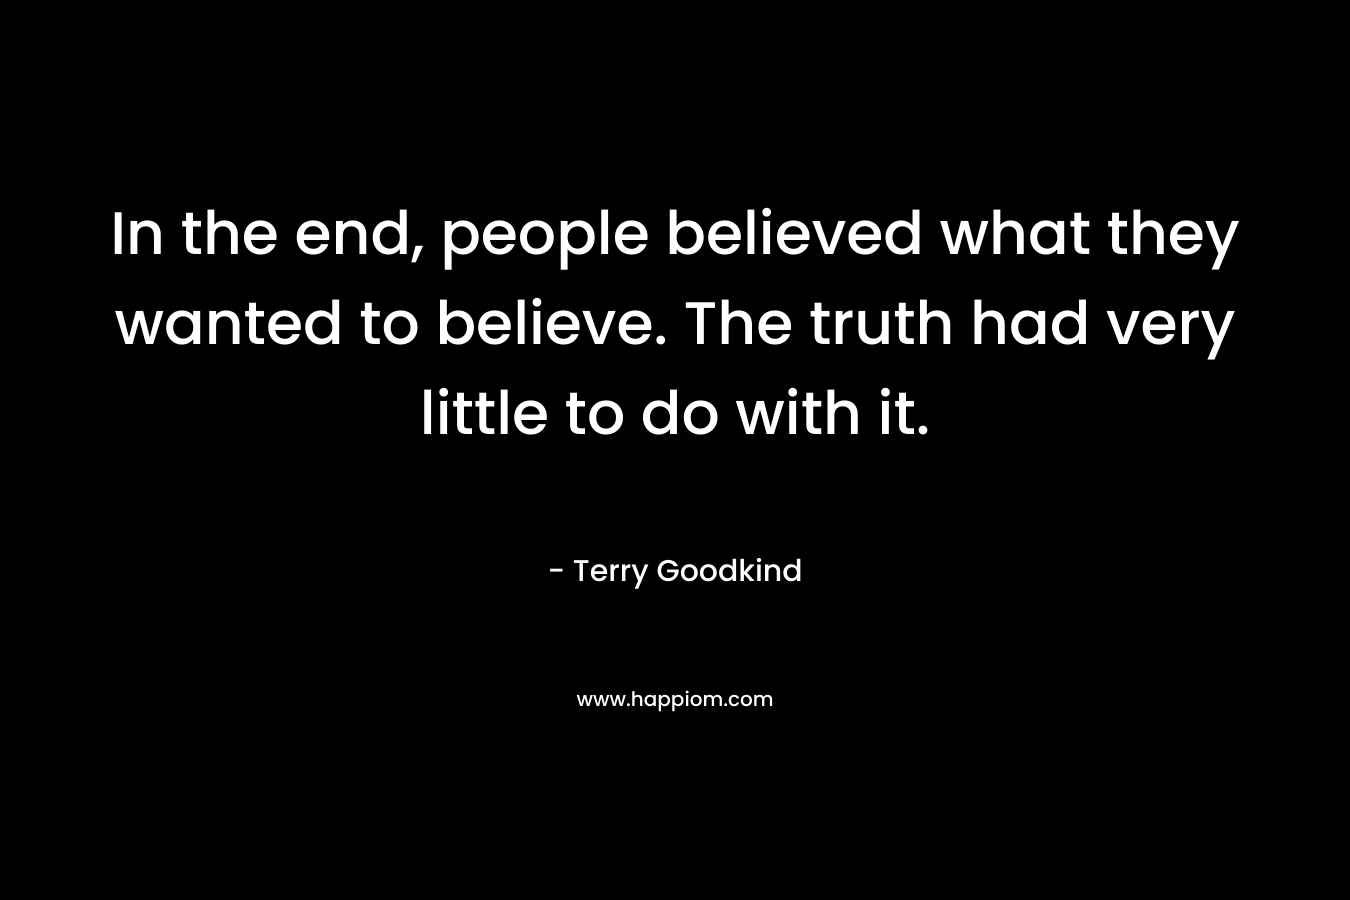 In the end, people believed what they wanted to believe. The truth had very little to do with it. – Terry Goodkind